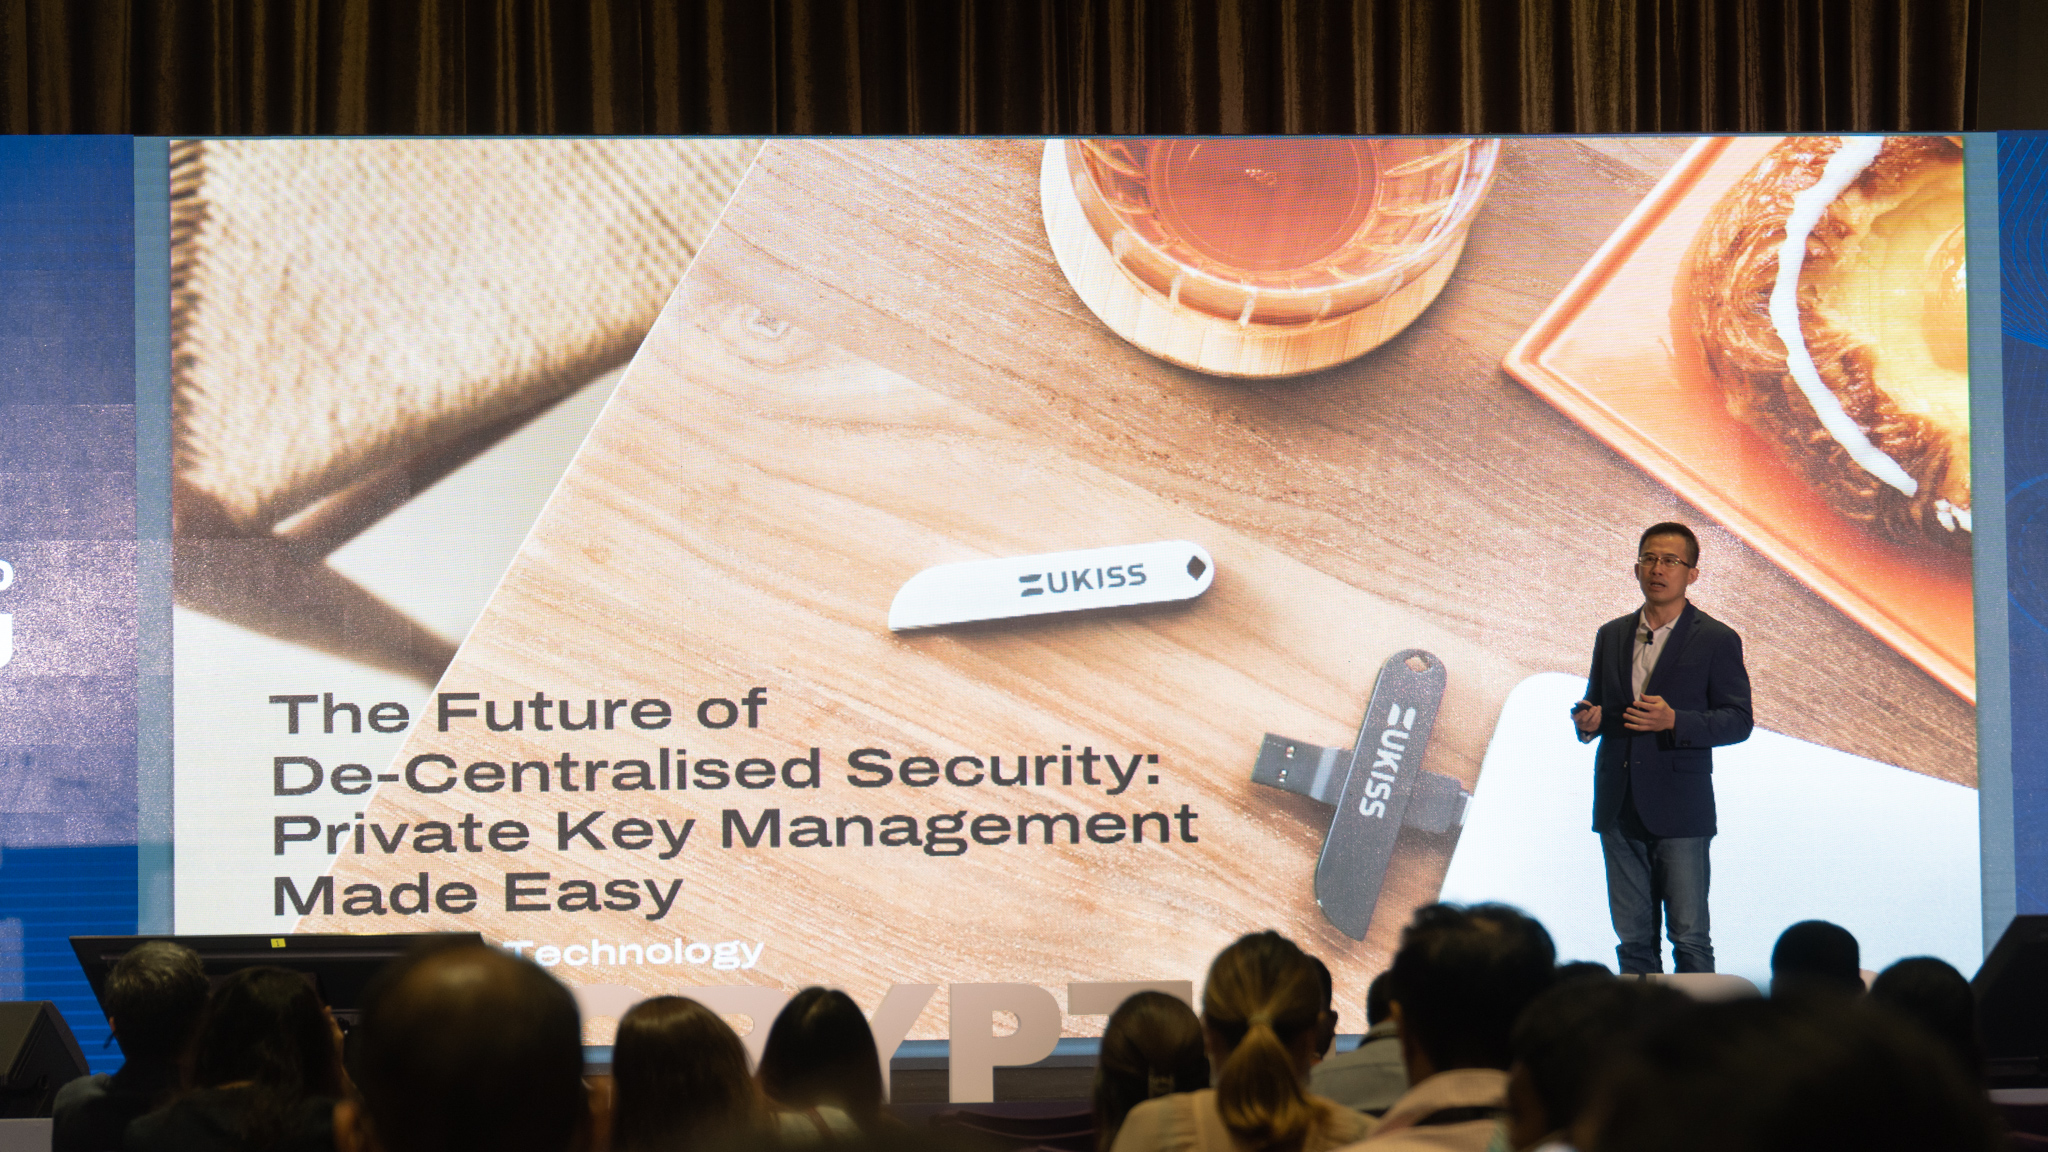 Ben Chan, Director, UKISS Technology, delivers a talk on 'The Future of Decentralised Security: Private Key Management Made Easy' at Crypto Expo Asia 2022.